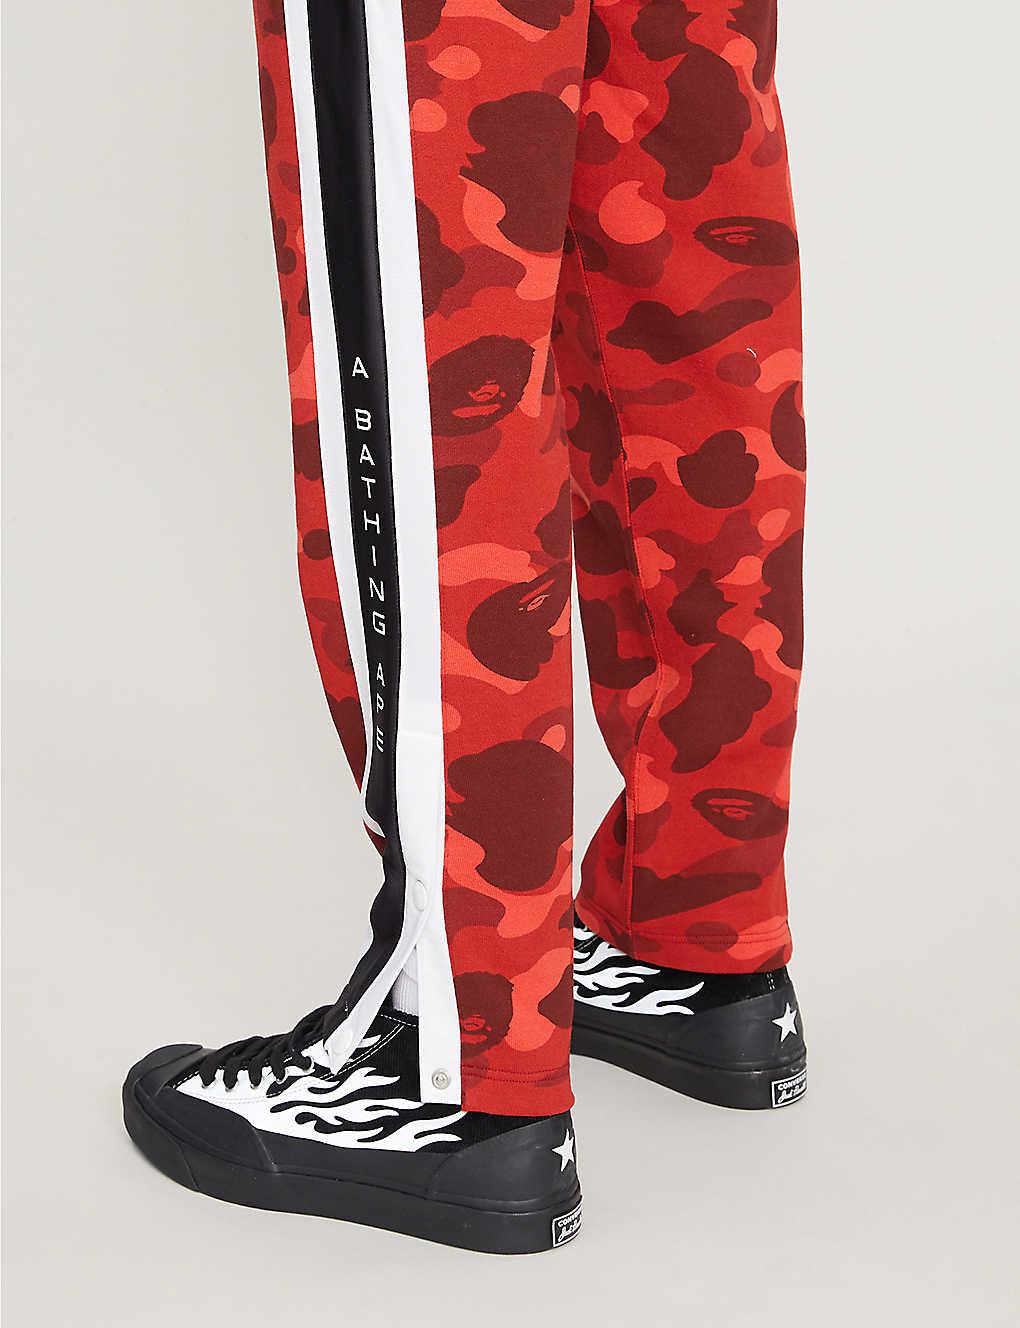 A Bathing Ape Cotton-jersey jogging Bottoms in Red for Men - Lyst